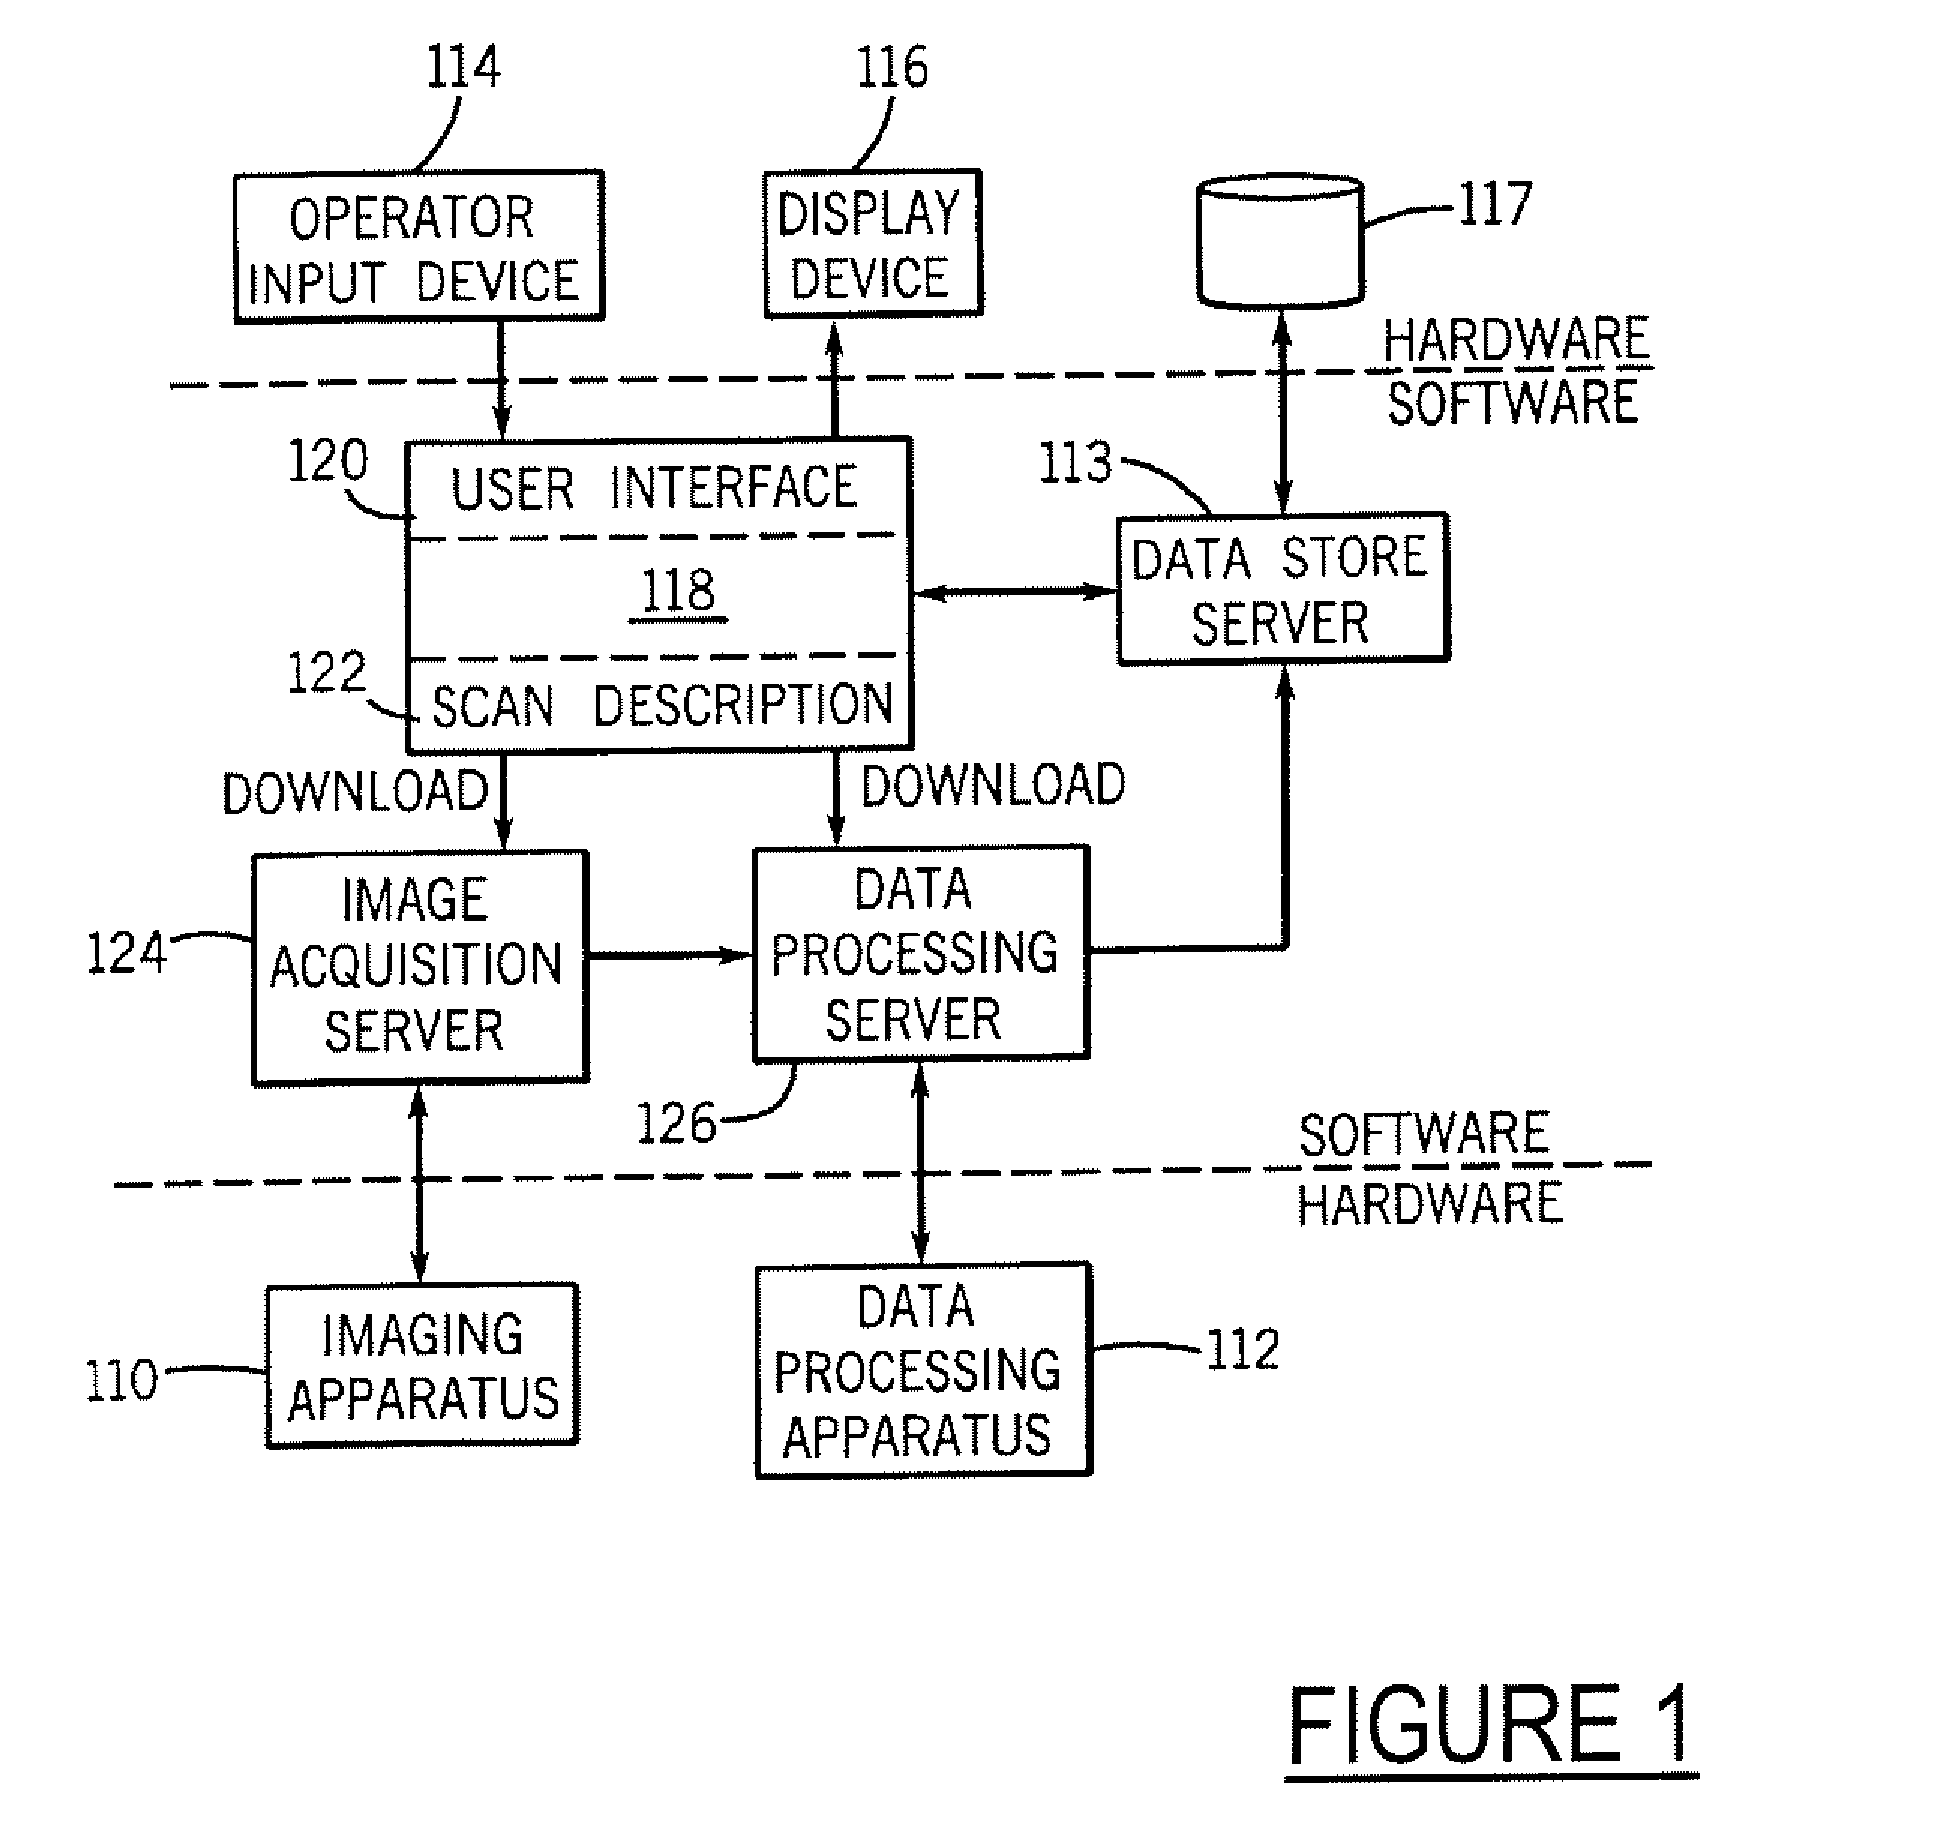 System and method for enabling a software developer to introduce informational attributes for selective inclusion within image headers for medical imaging apparatus applications